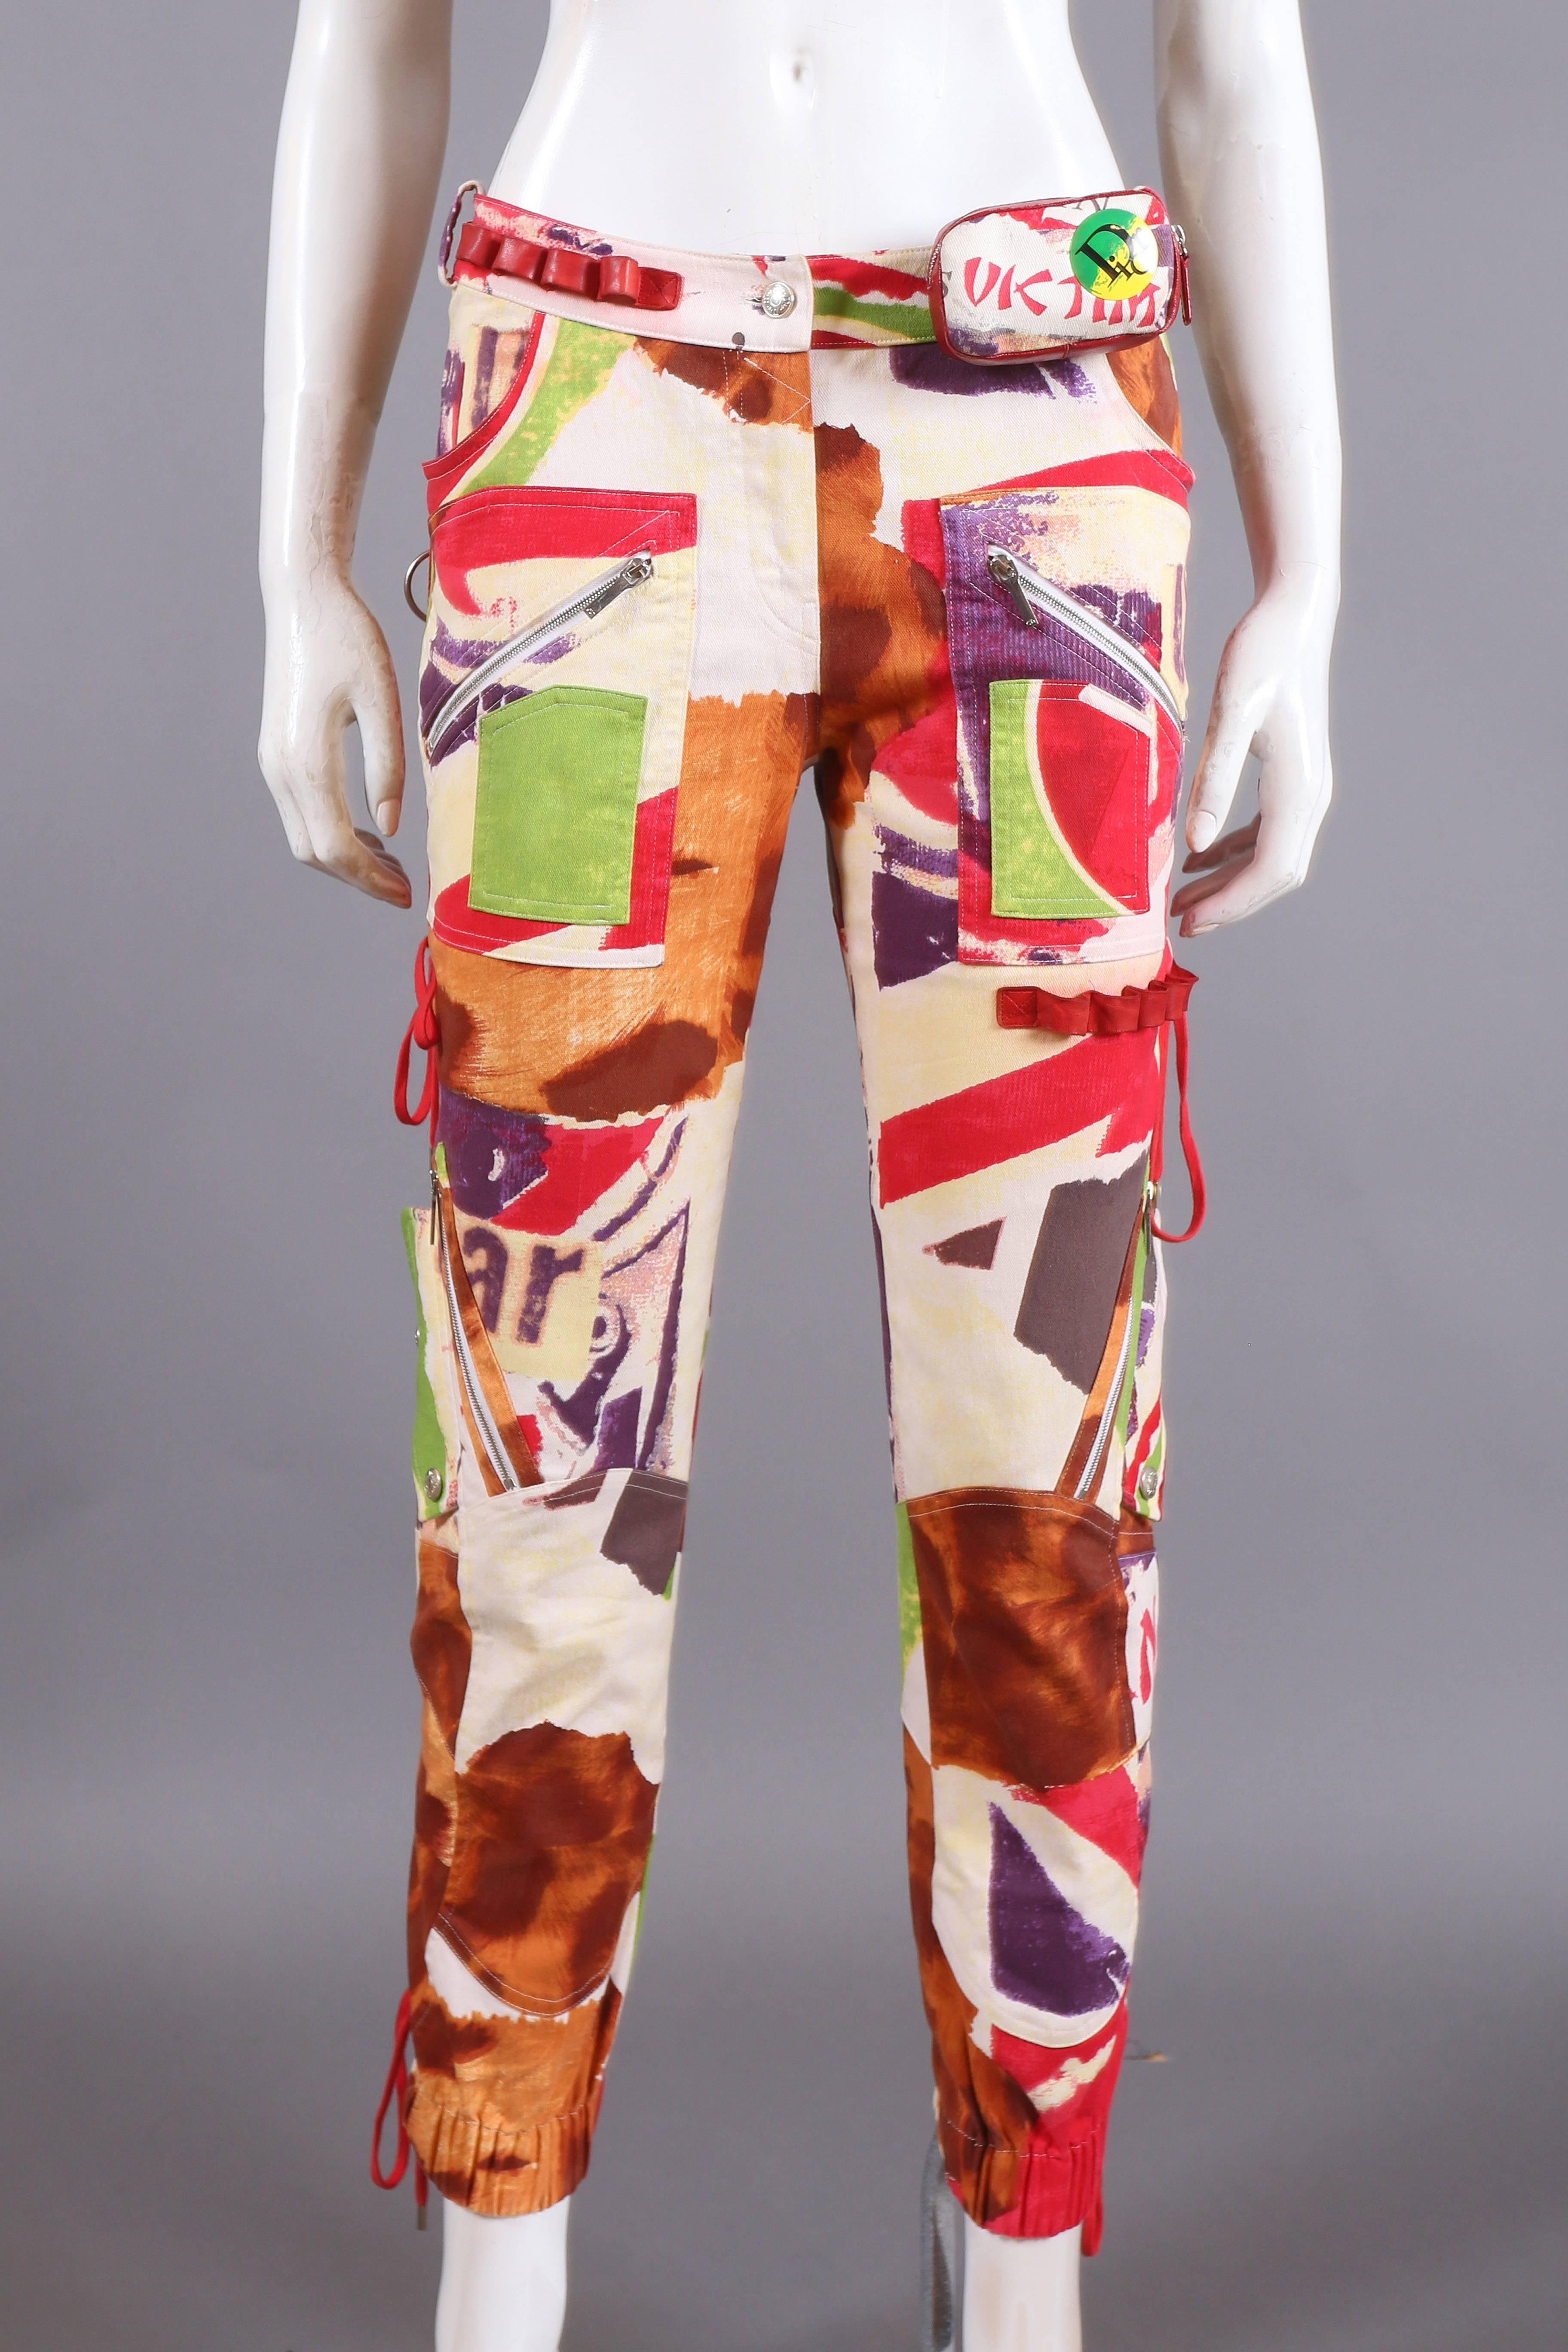 John Galliano for Christian Dior graffiti print cropped pants, spring-summer 2003. The pants features elasticated ankle cuffs, detachable leather pouch on waist, decorative lace up fastenings and multiple zippered pockets. 

 